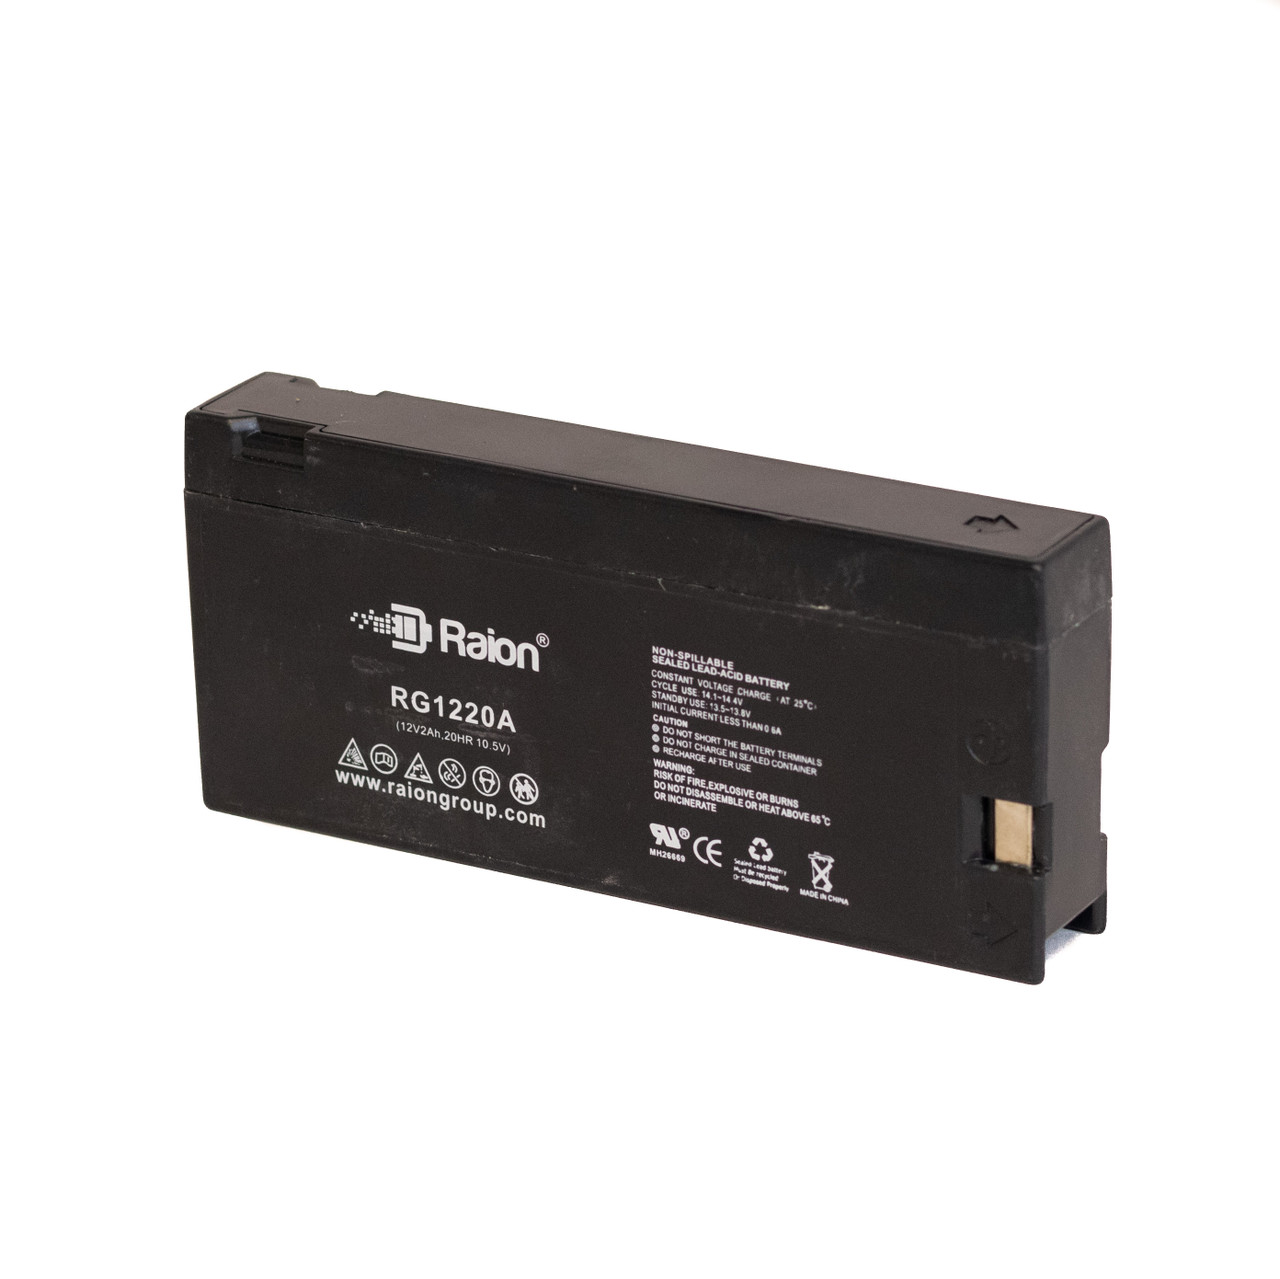 Raion Power RG1220A Replacement Battery for RMD Navigator GPS System